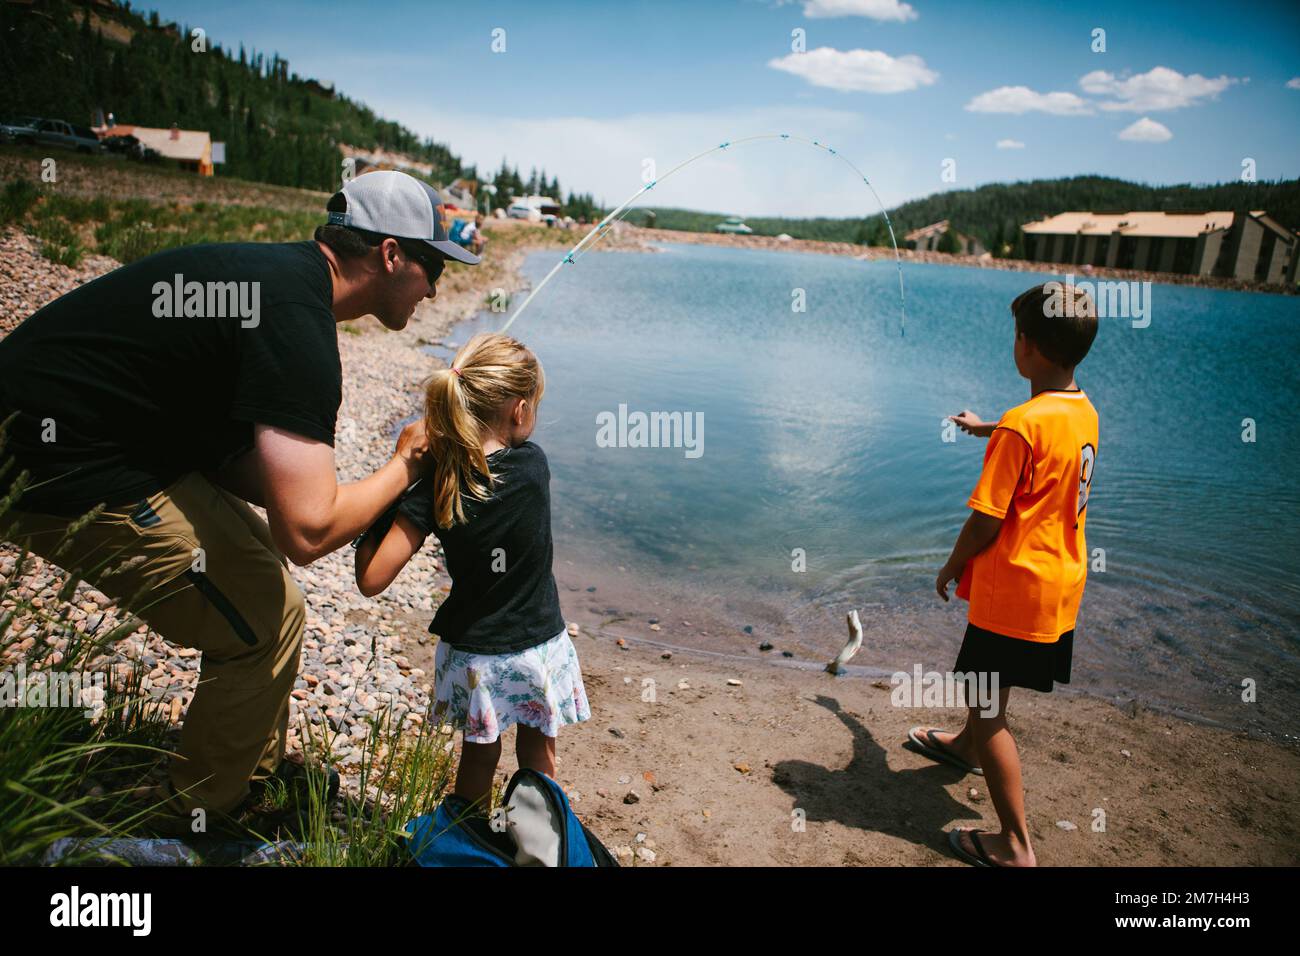 Family catches a fish from a mountain lake on adventure vacation Stock Photo